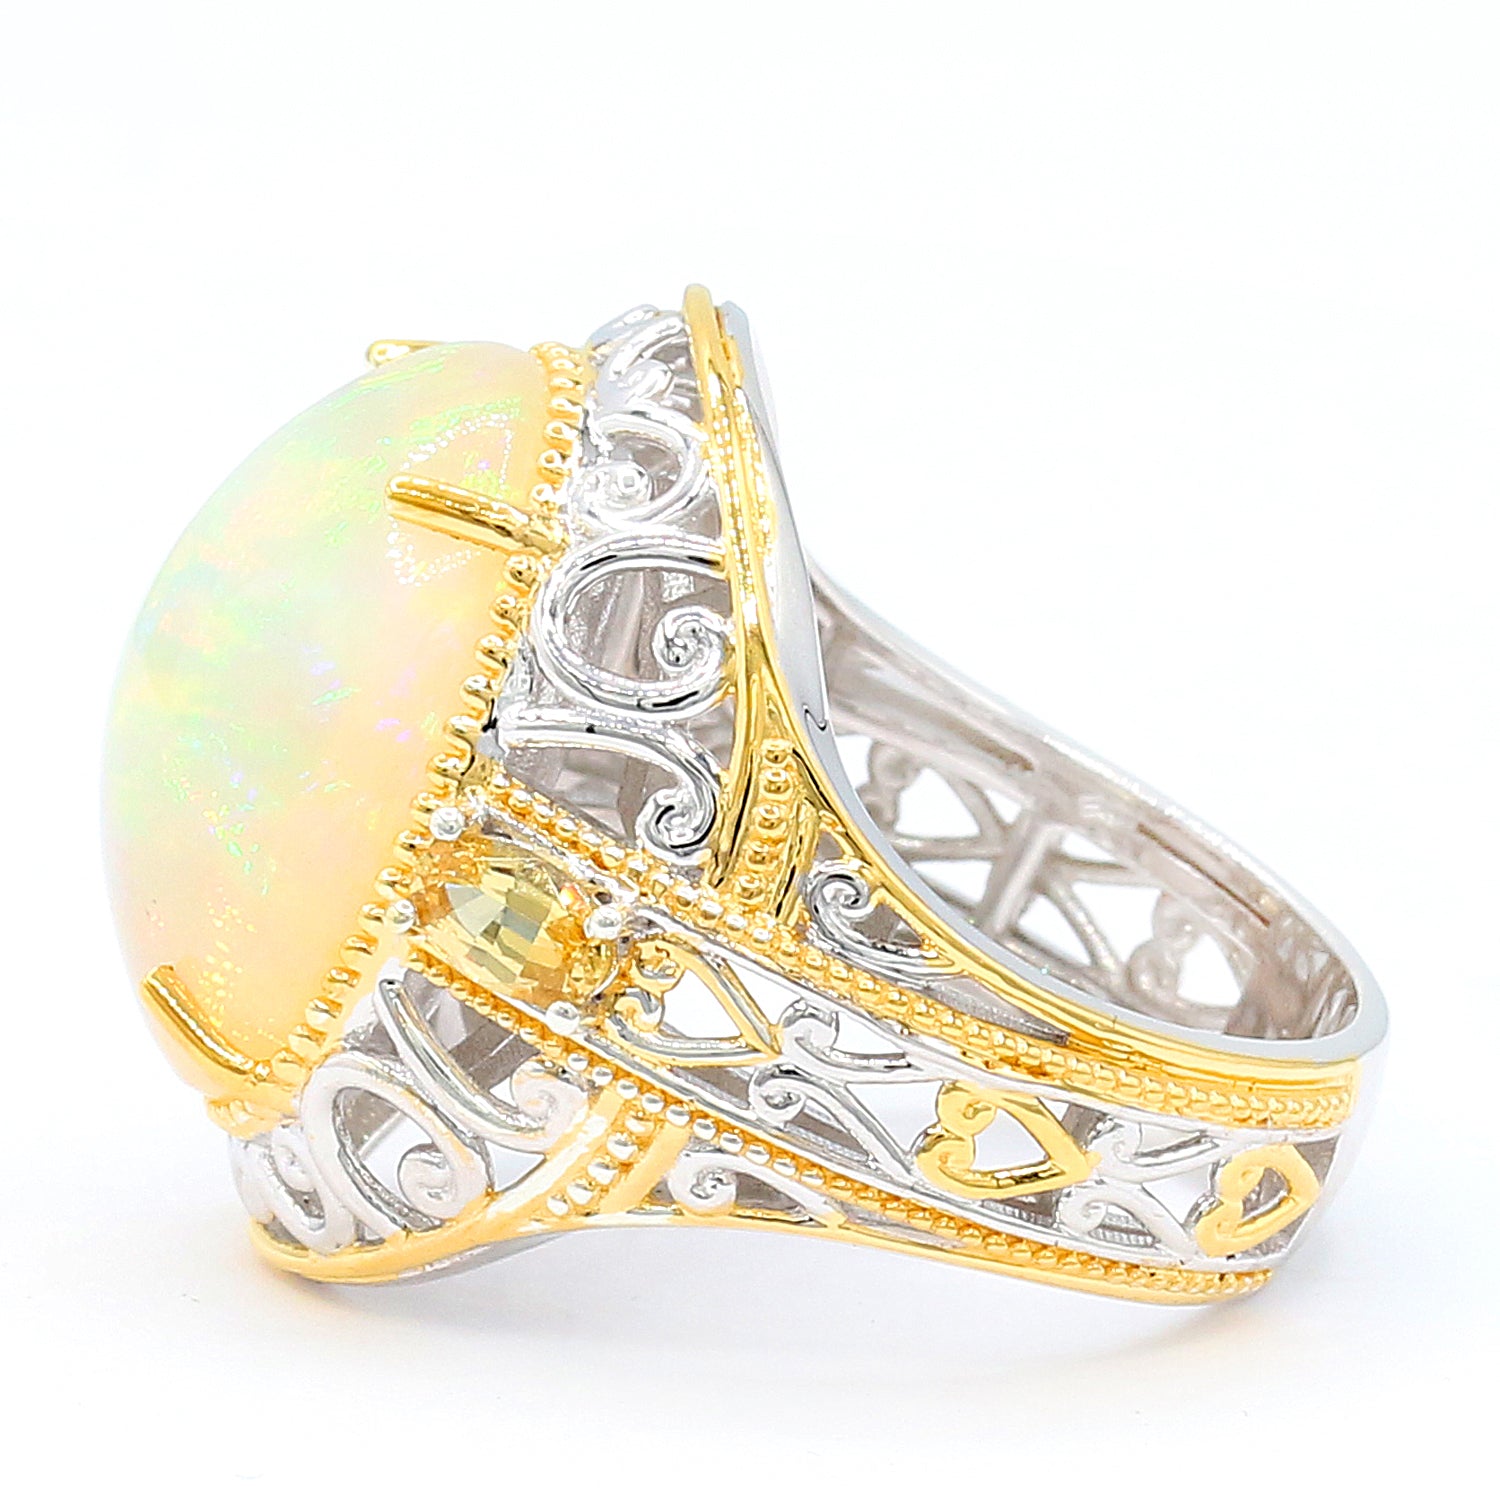 Limited Edition Gems en Vogue Luxe, One-of-a-Kind 8.10ctw Ethiopian Opal & Canary Tourmaline Ring